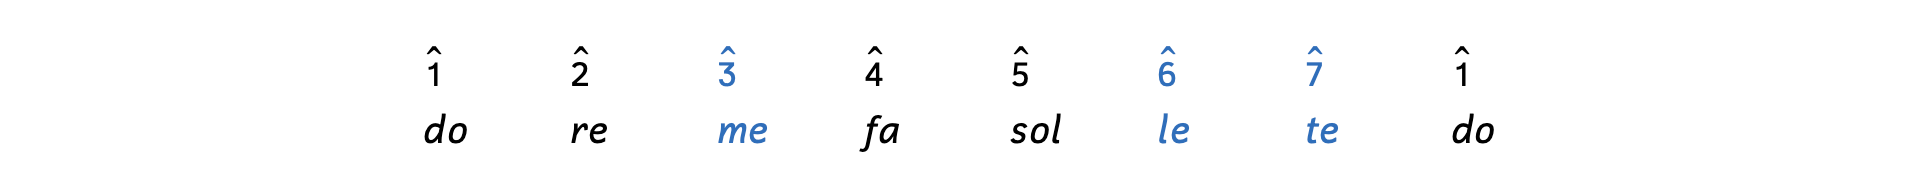 The solfège in minor are scale degree 1 is doe, scale degree 2 is ray, scale degree 3 is may, scale degree 4 is fa, scale degree 5 is sol, scale degree 6 is lay, scale degree 7 is té, and scale degree 1 repeats.